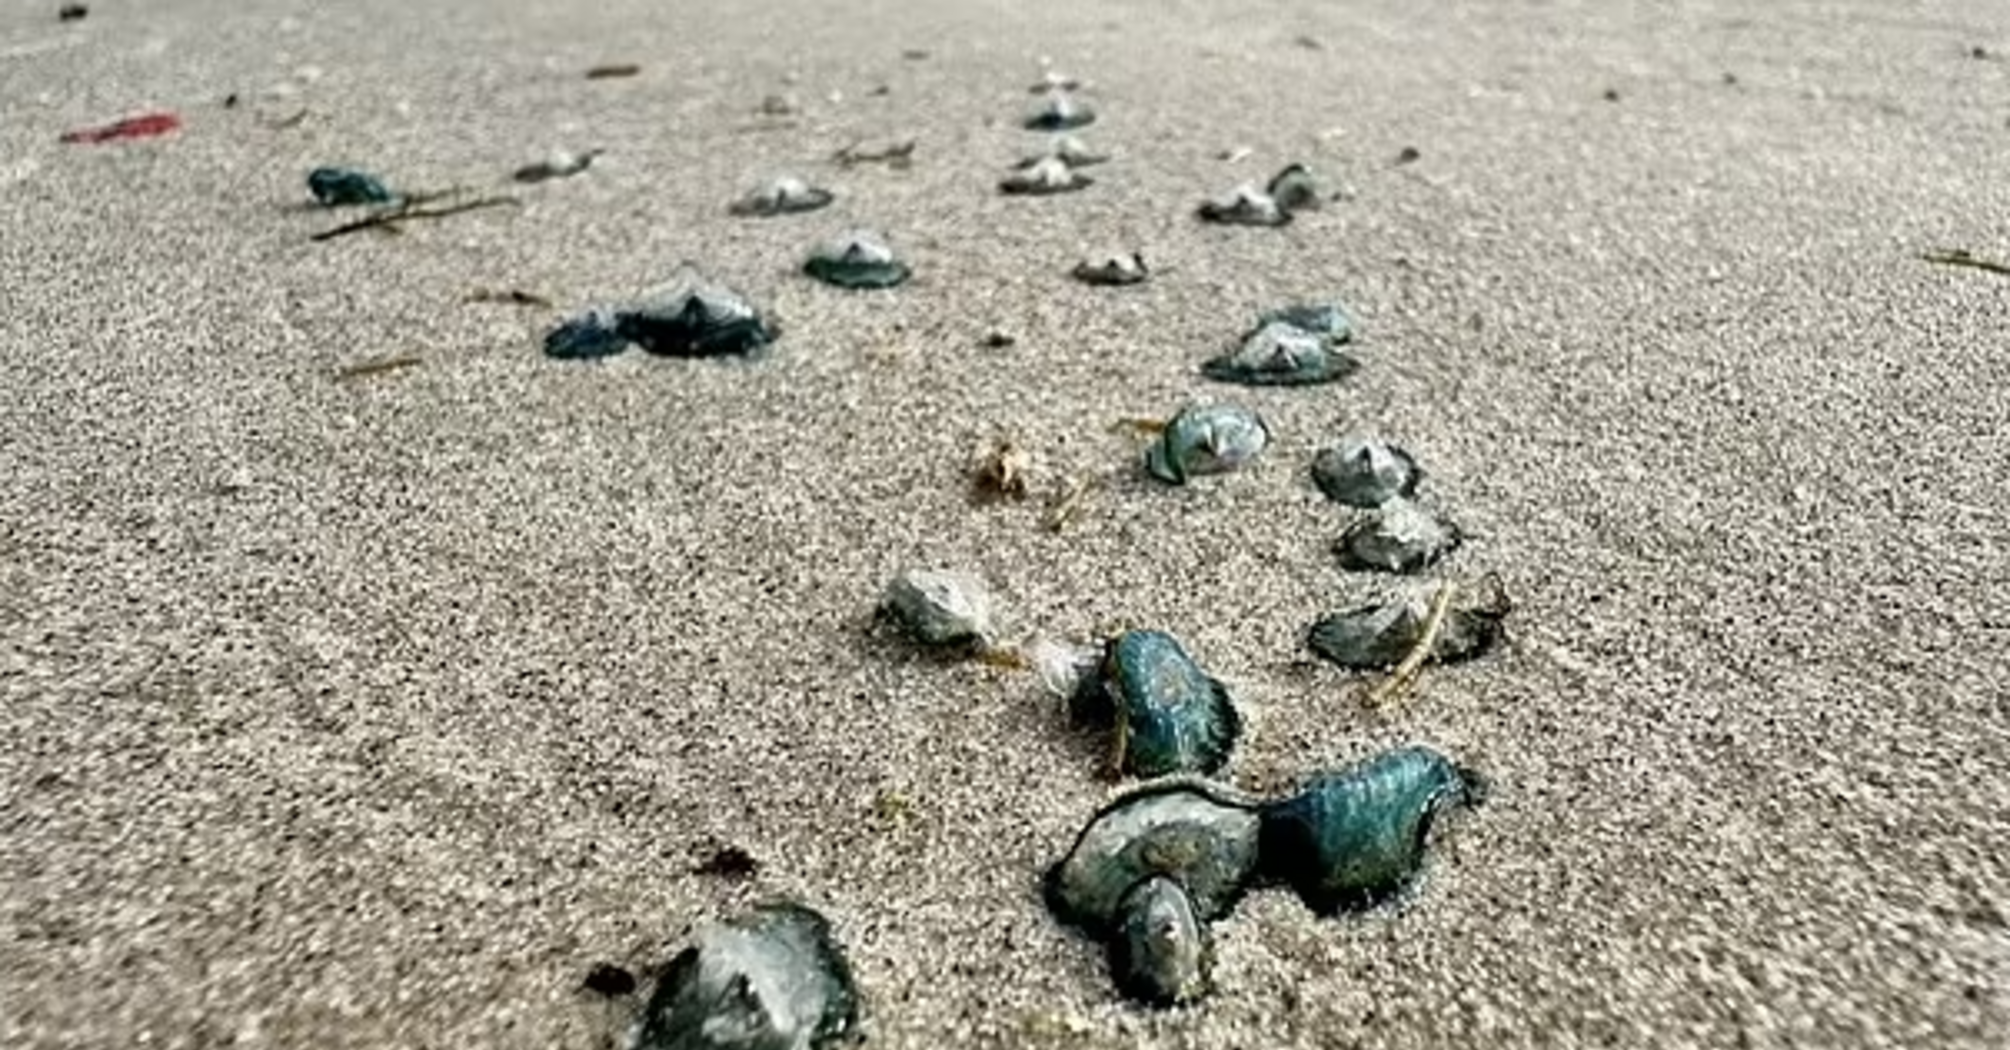 Poisonous "blue dragons" are spotted on the beaches of Texas